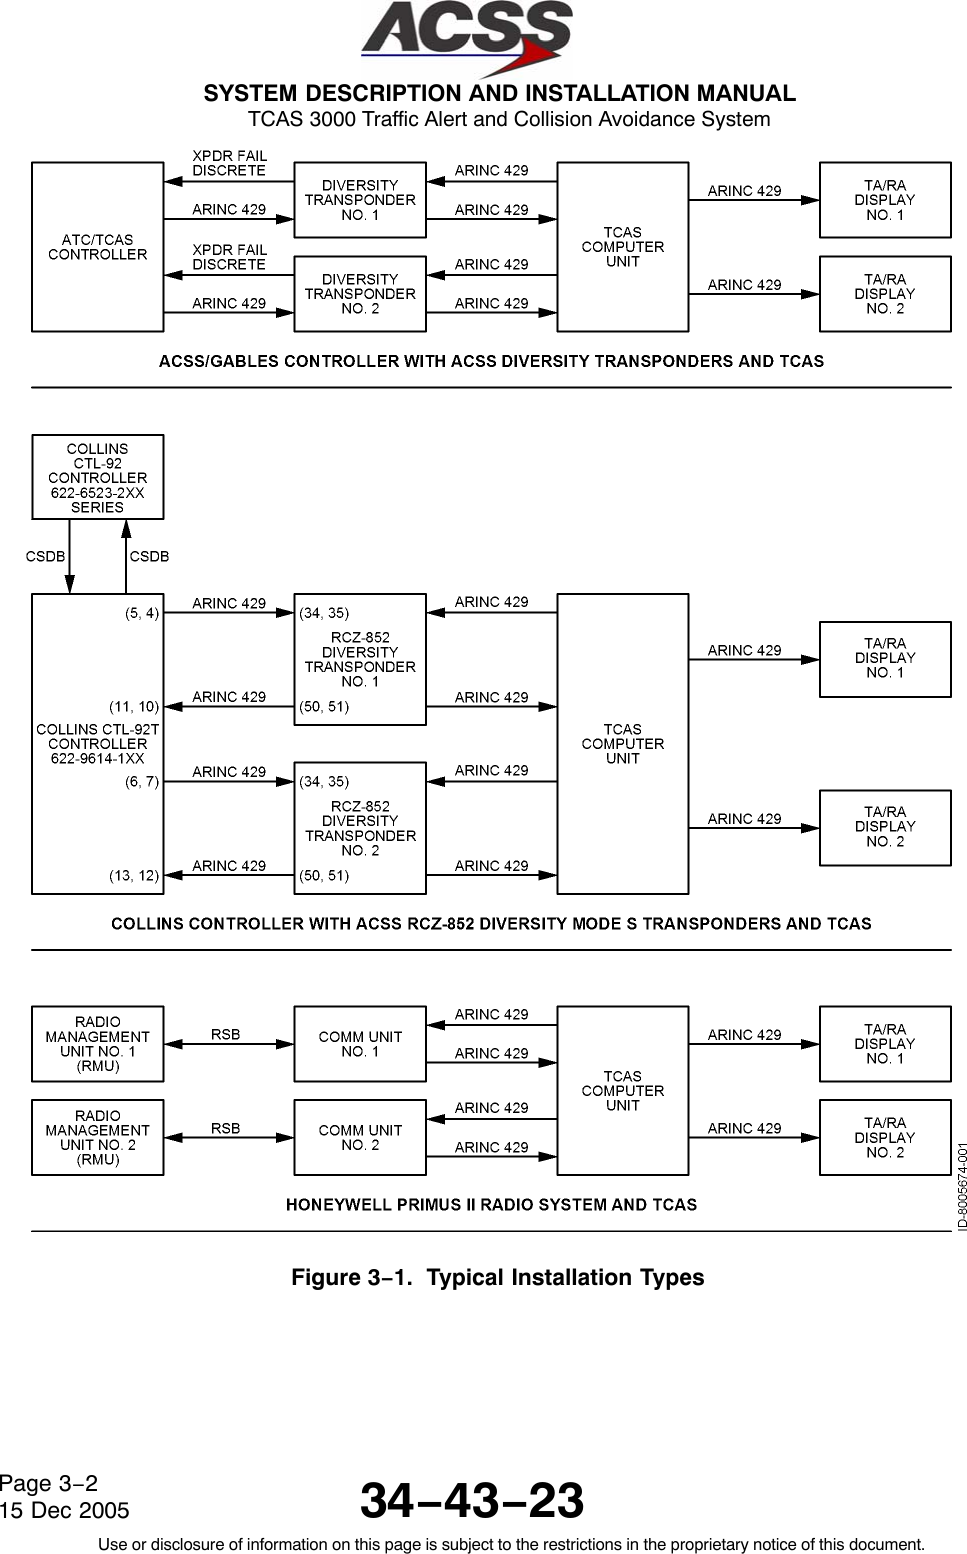  SYSTEM DESCRIPTION AND INSTALLATION MANUAL TCAS 3000 Traffic Alert and Collision Avoidance System34−43−23Use or disclosure of information on this page is subject to the restrictions in the proprietary notice of this document.Page 3−215 Dec 2005Figure 3−1.  Typical Installation Types